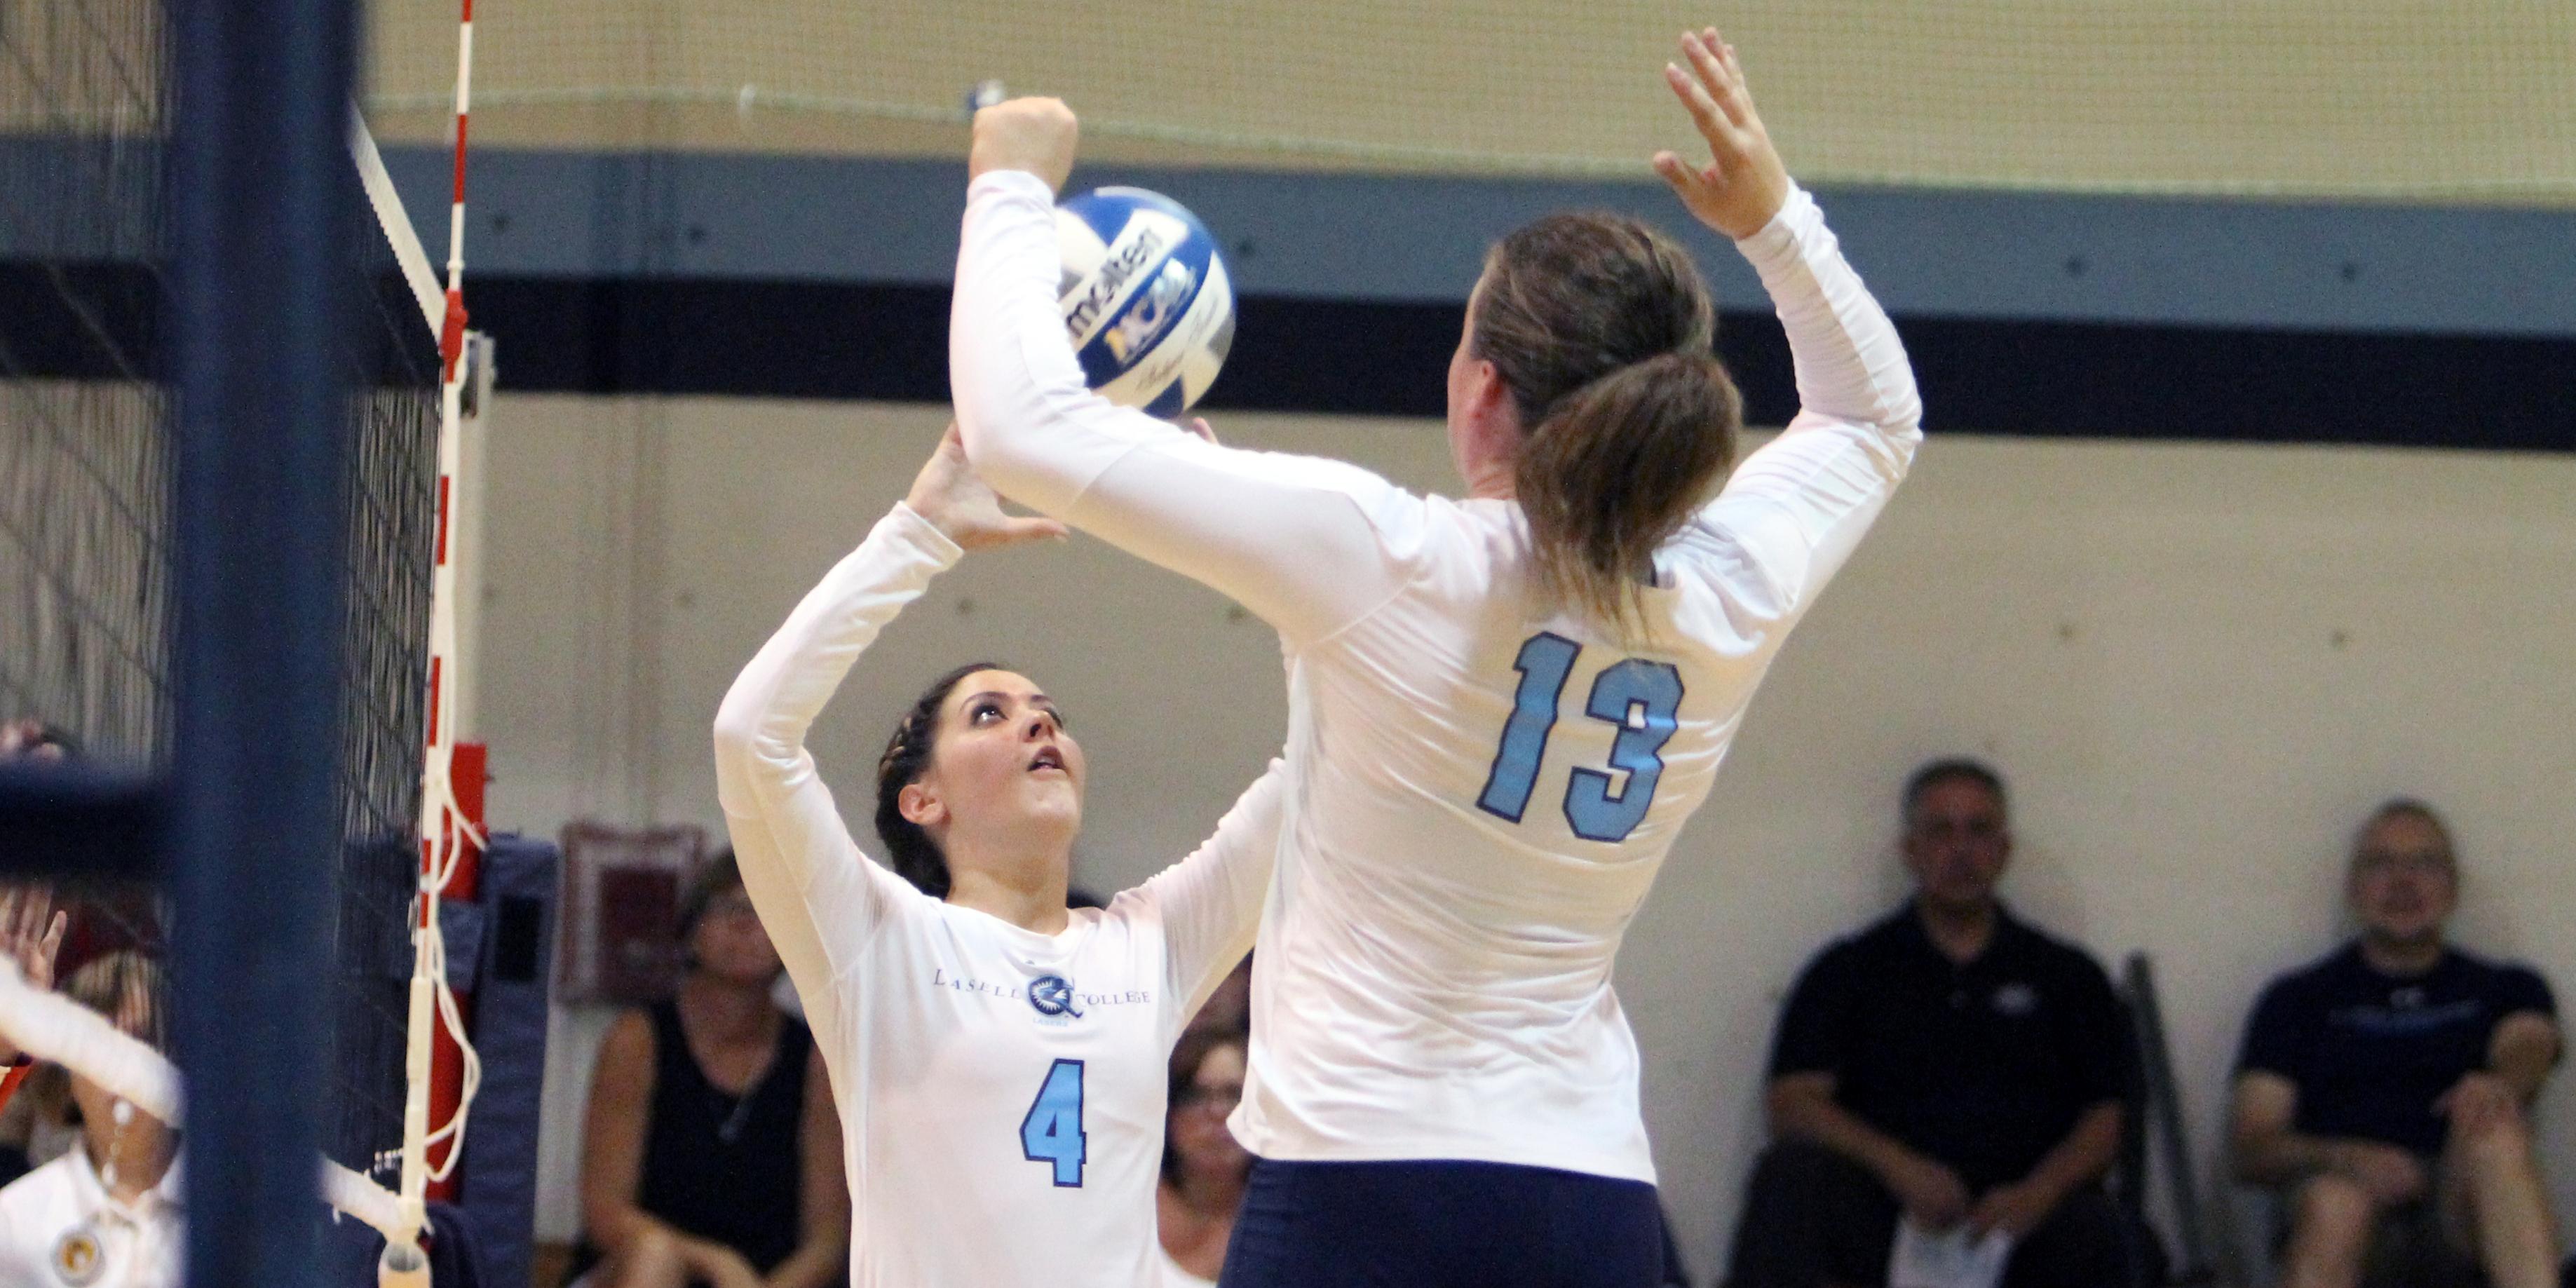 Women's Volleyball Bested by Anna Maria, Emmanuel in GNAC Tri-Match